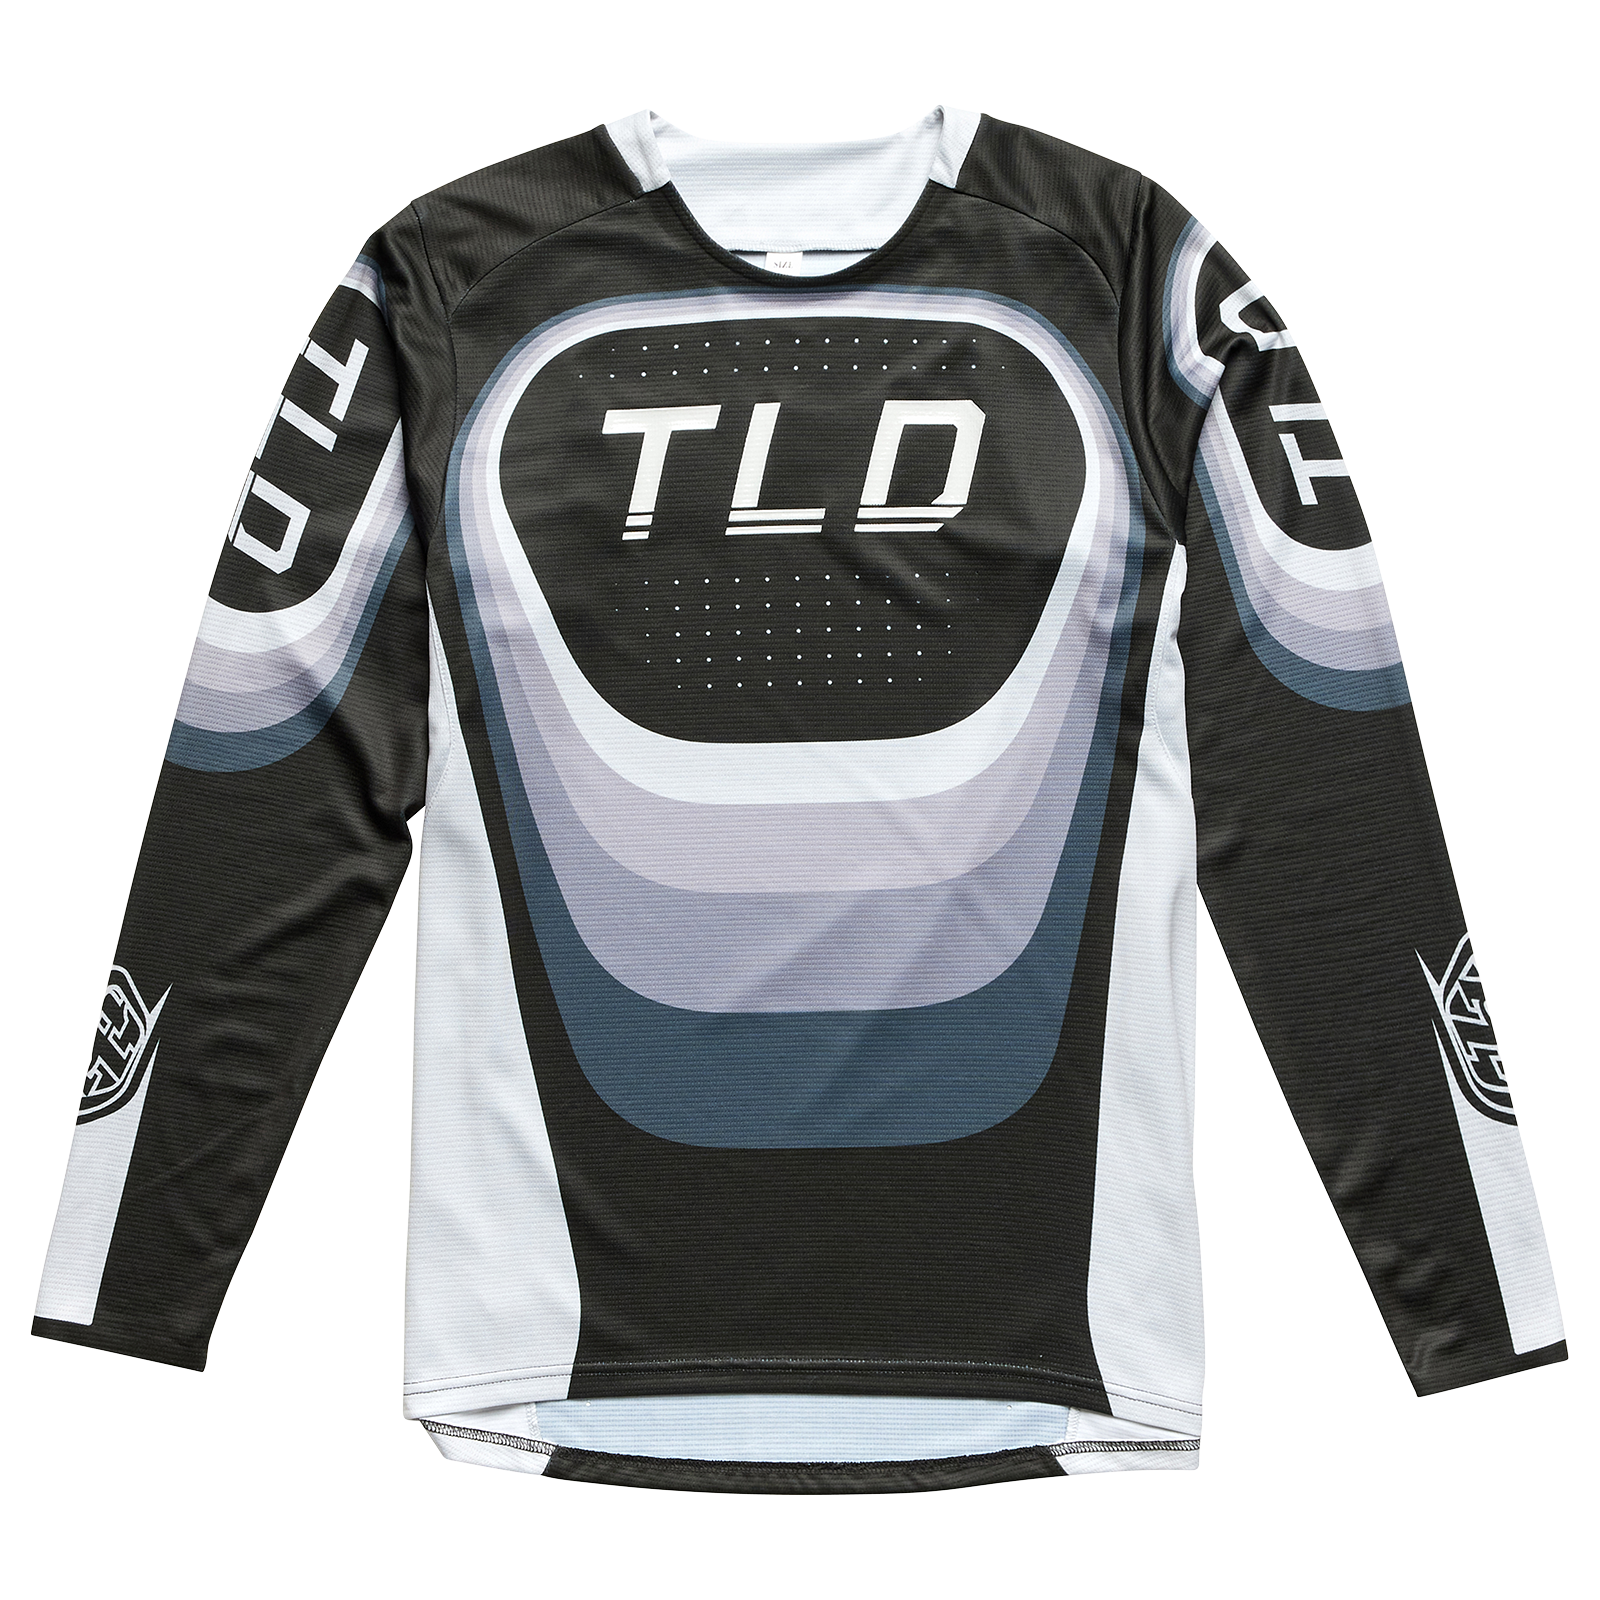 Replace:
Long-sleeved TLD Youth Sprint Jersey Reverb Black with black, white, and grey color scheme featuring moisture-wicking fabric and the TLD logo.